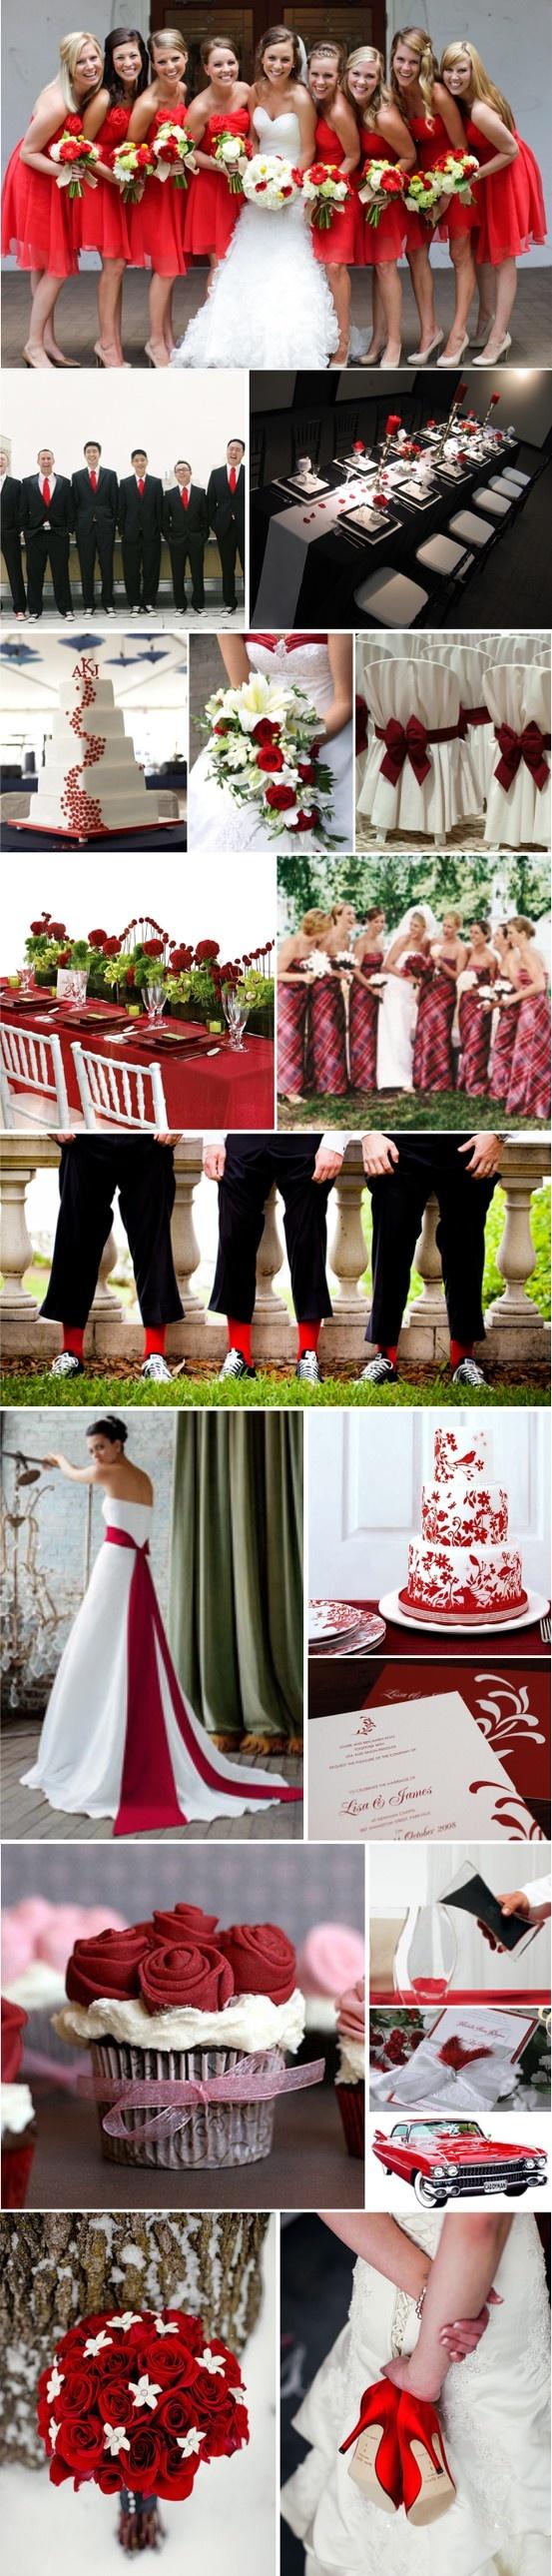 Mariage - Mariages rouges